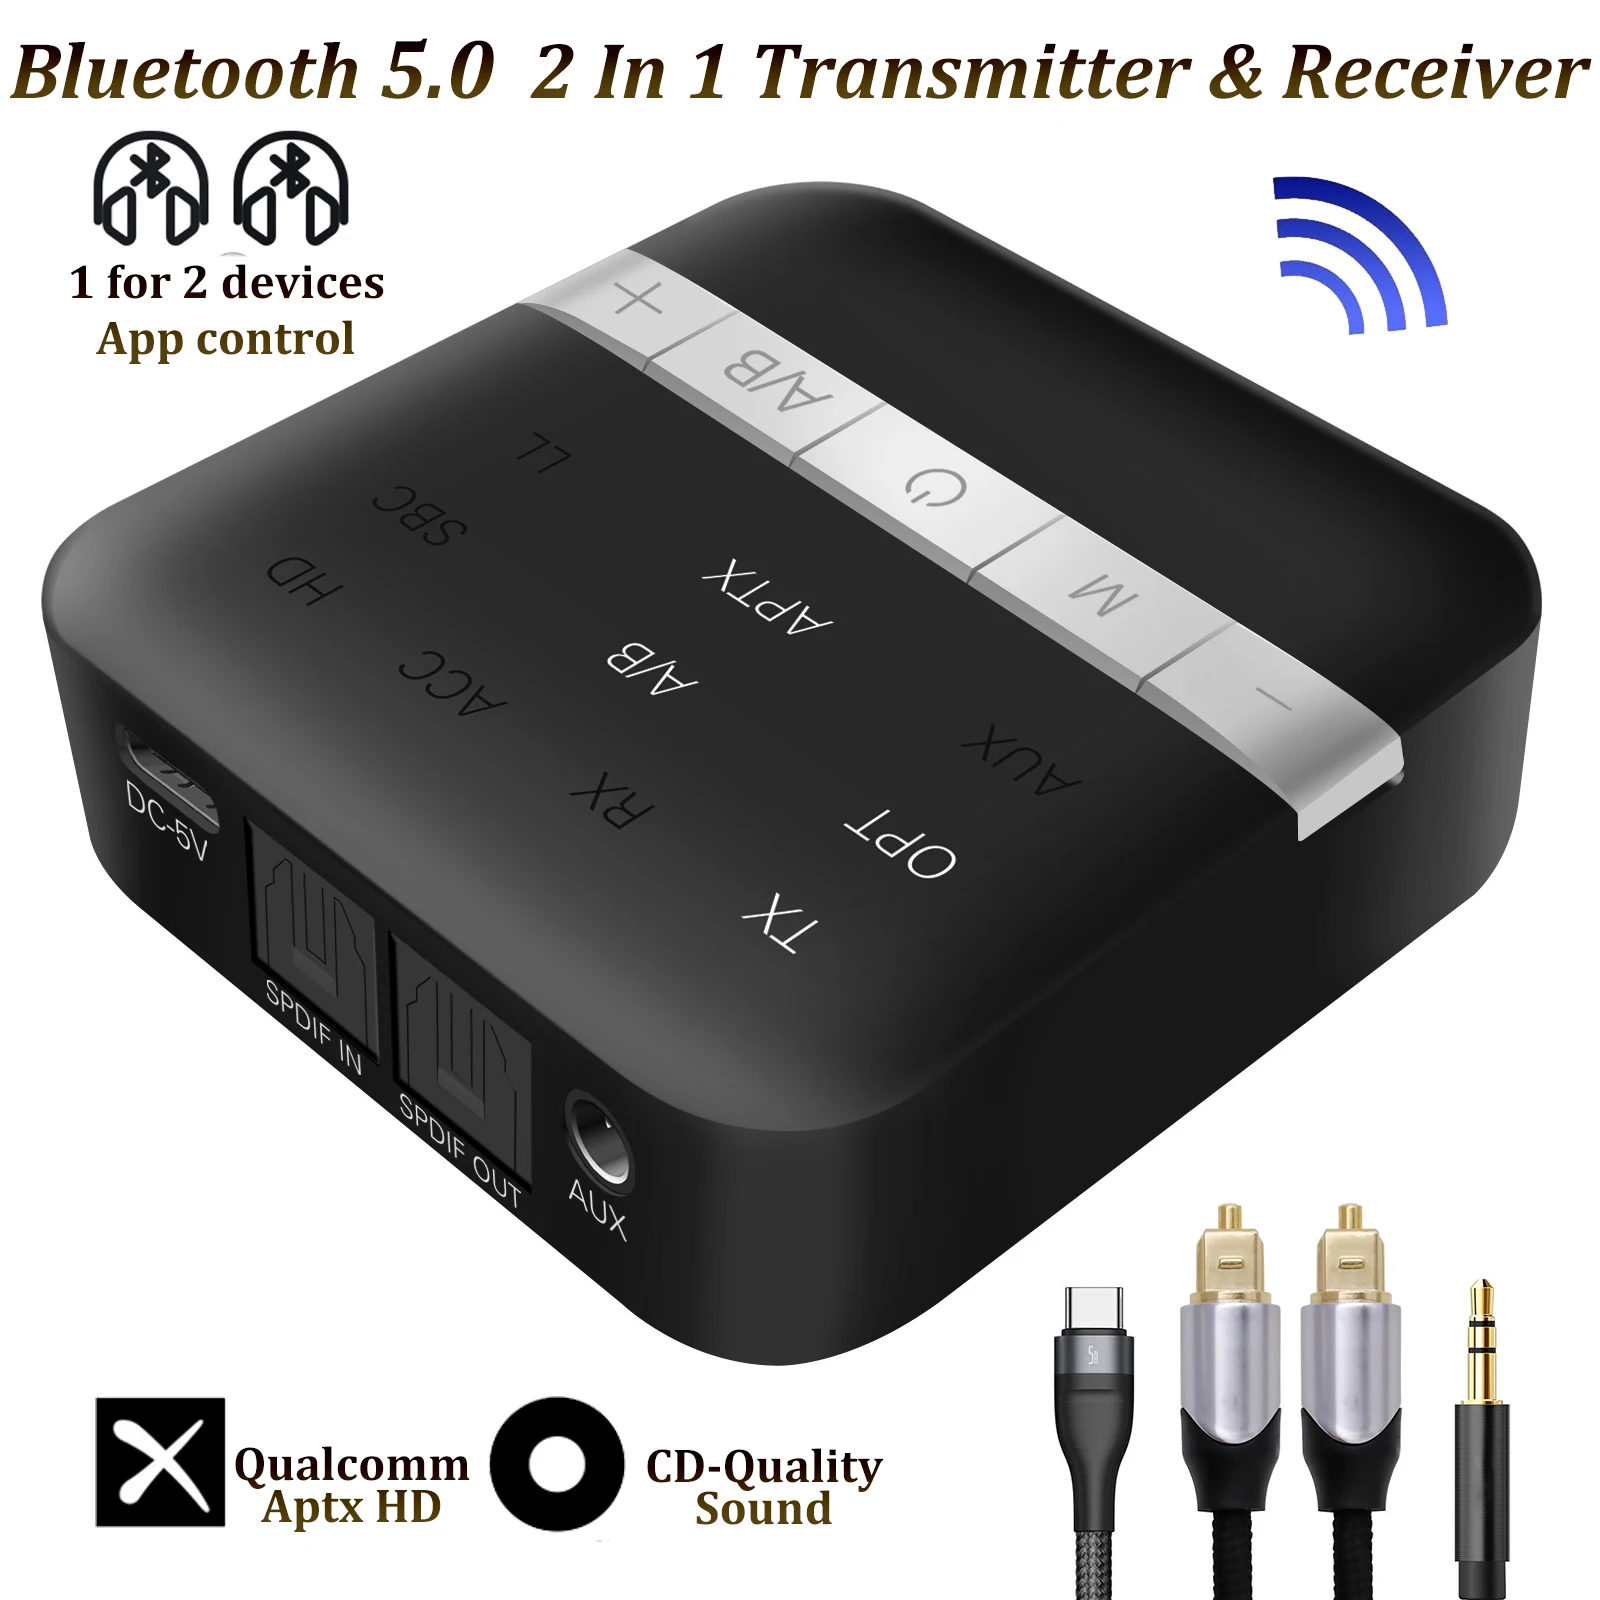 

Bluetooth 5.0 Audio Transmitter Receiver Aptx HD LL Low Latency App Control Wireless Adapter RCA SPDIF 3.5mm Aux Jack for TV PC